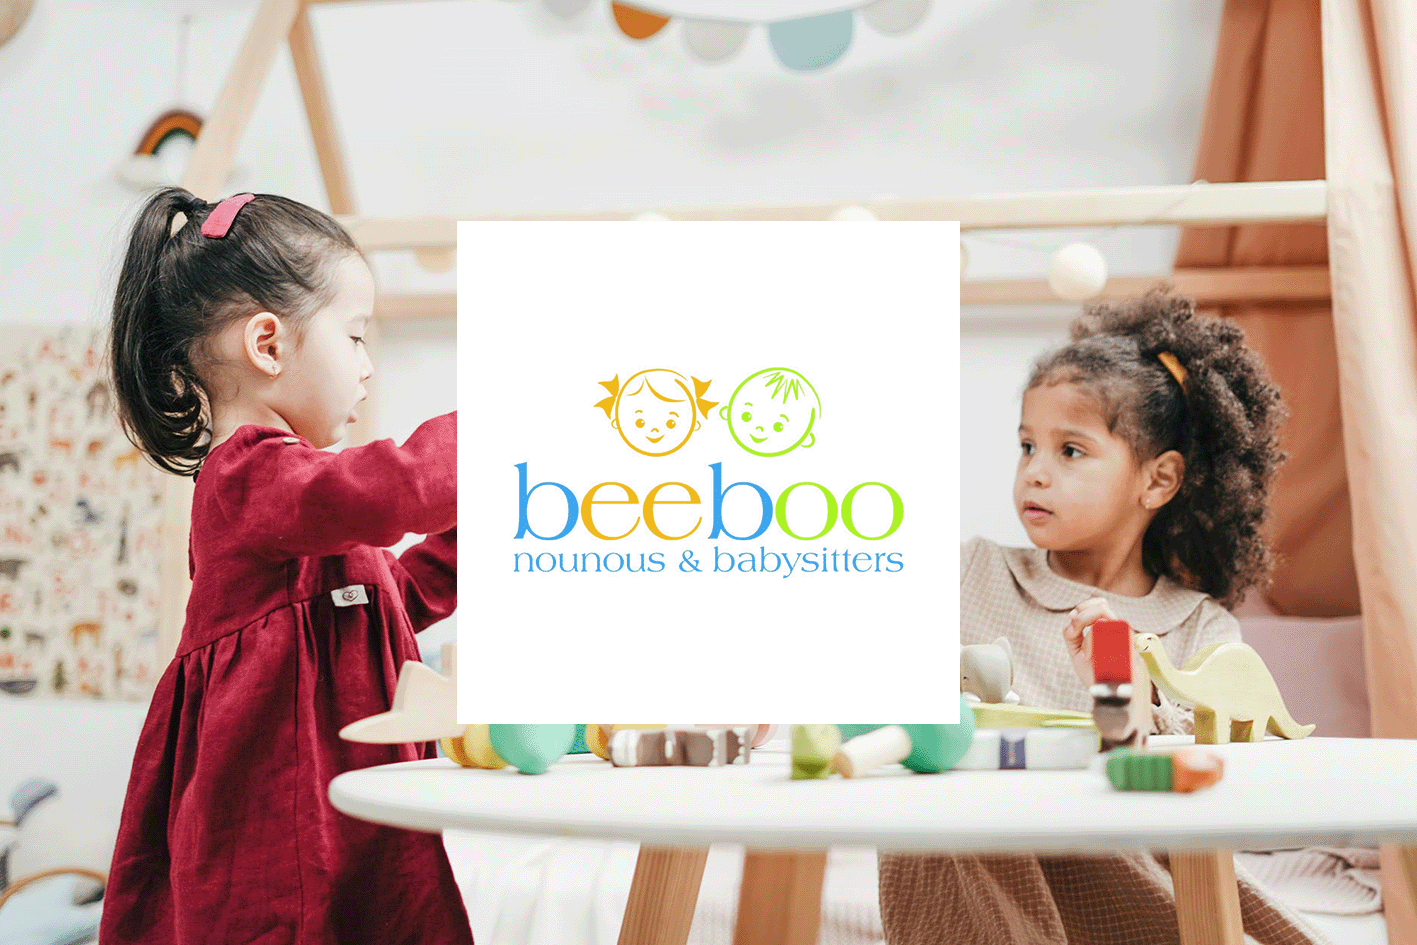 Find childcare with our partner Beeboo